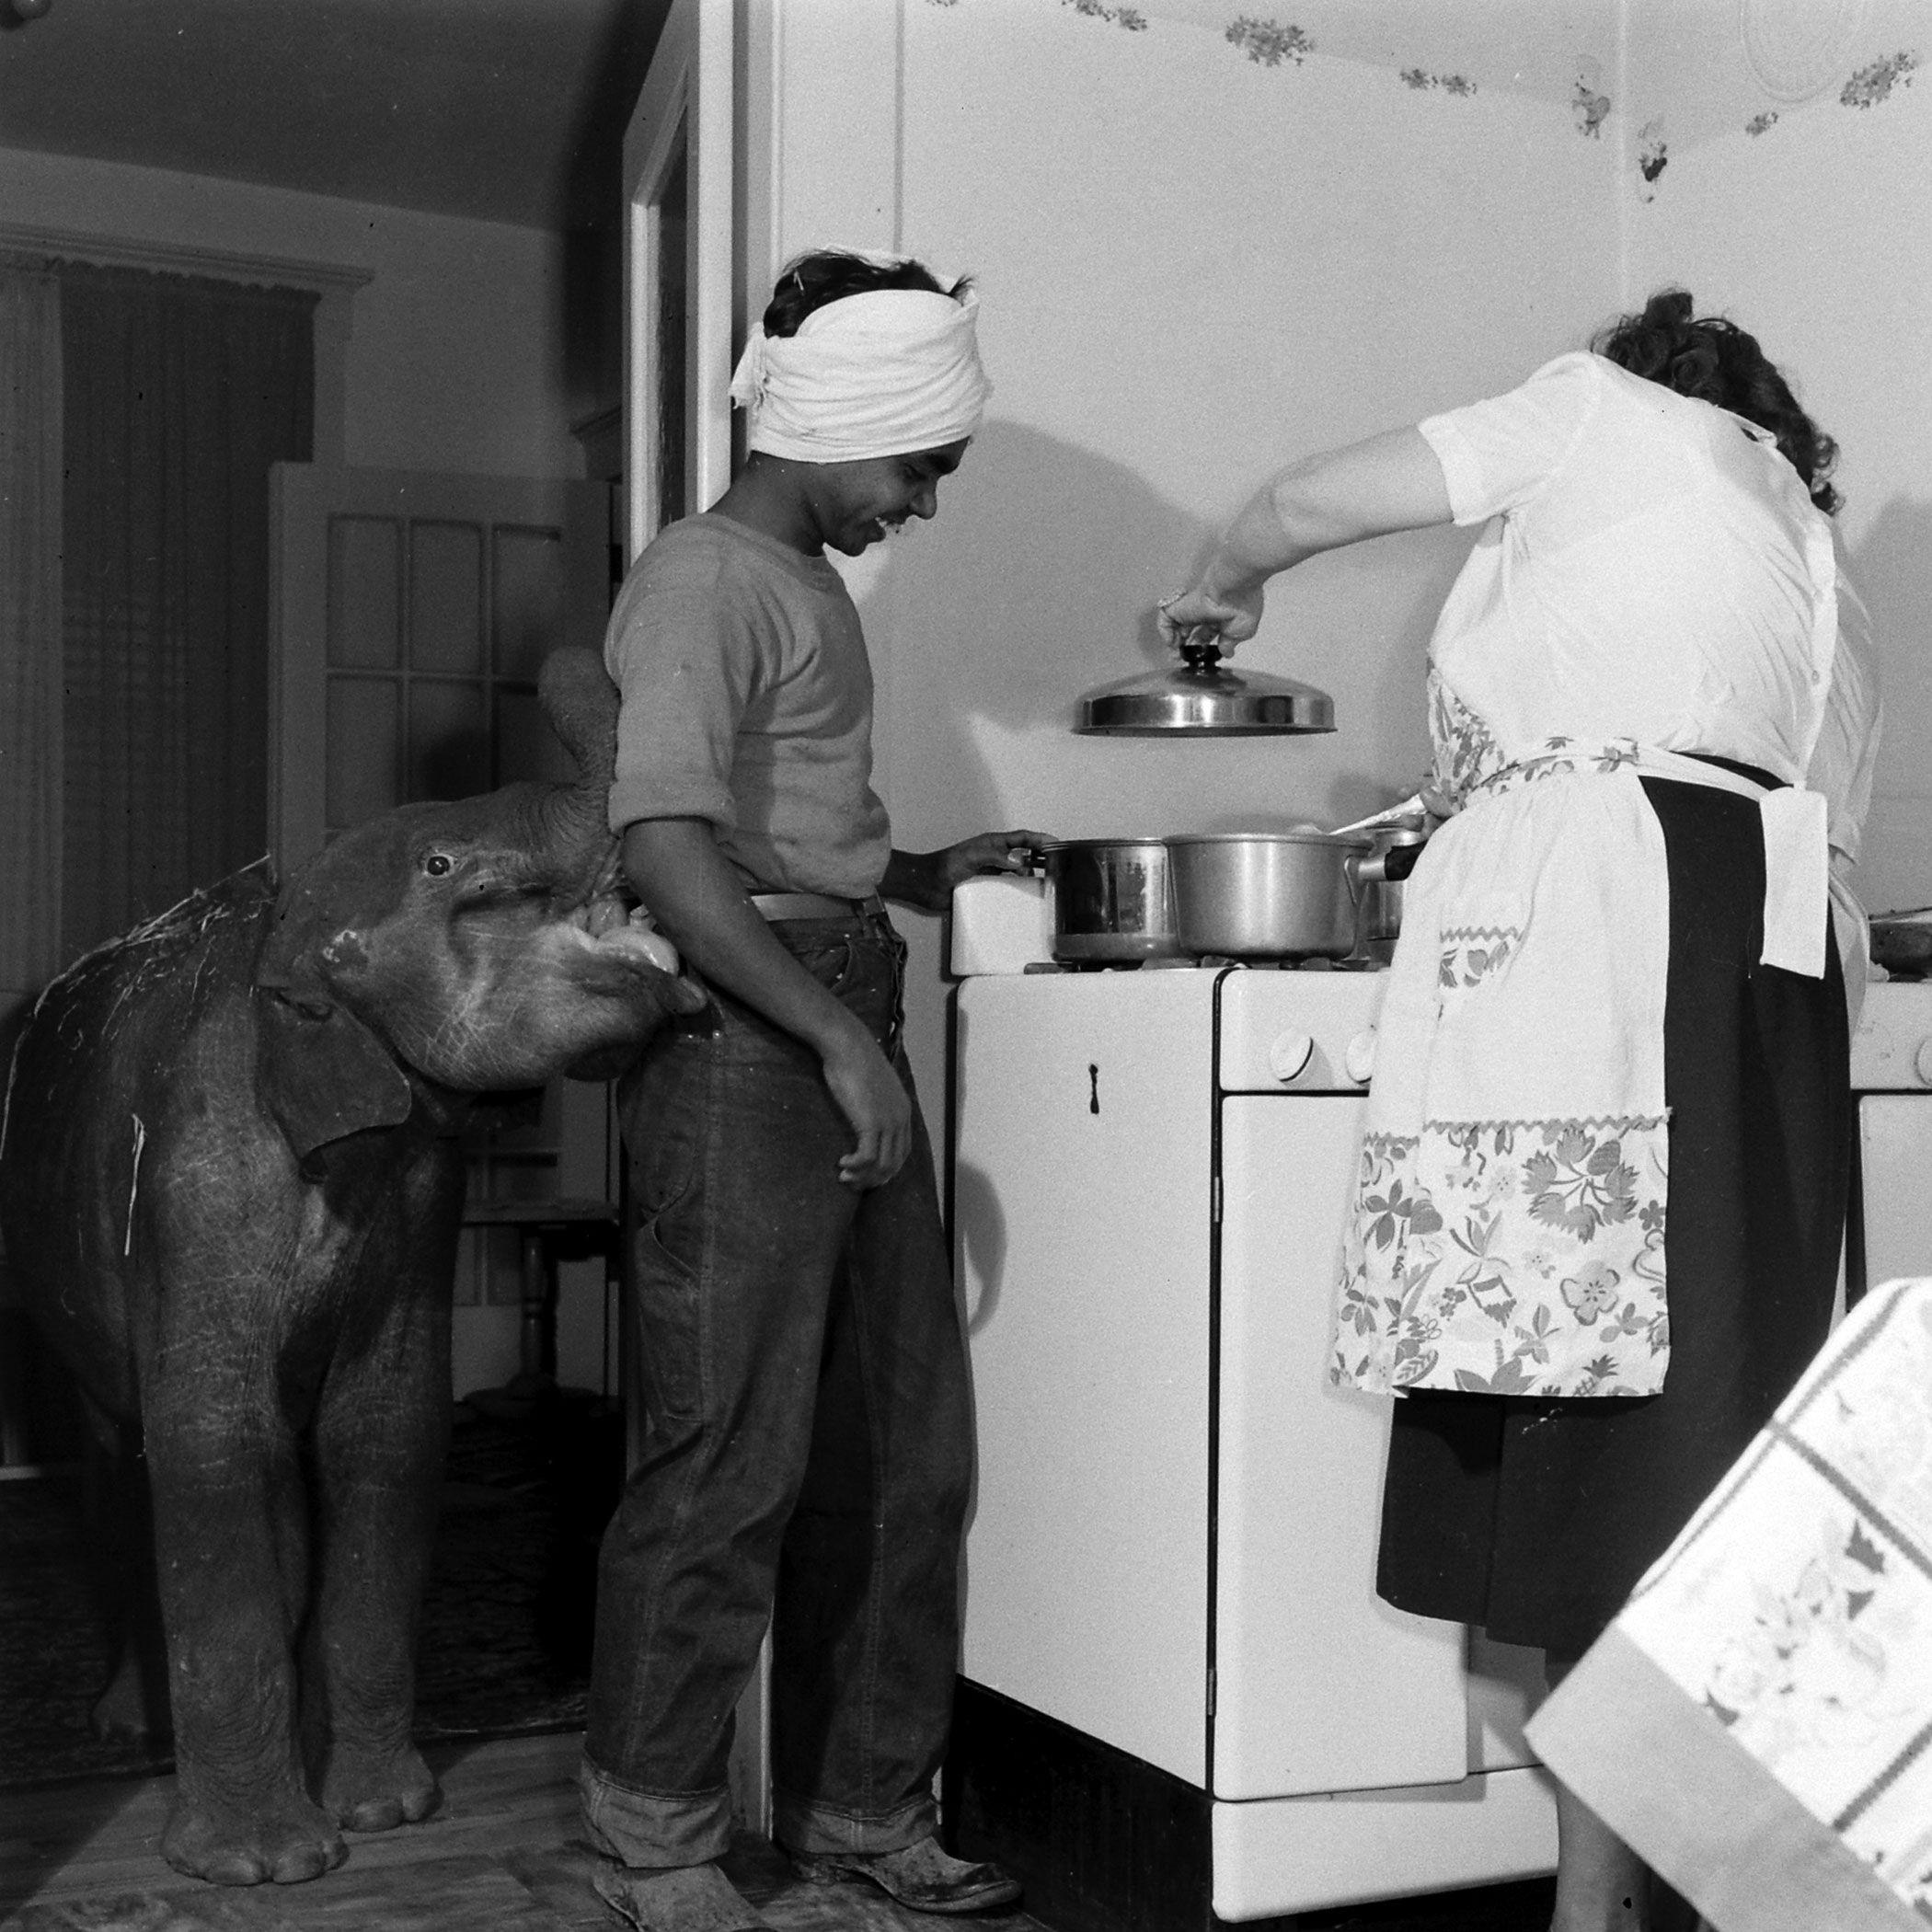 "Butch" the baby elephant with her keeper Singh in the Davenport kitchen.